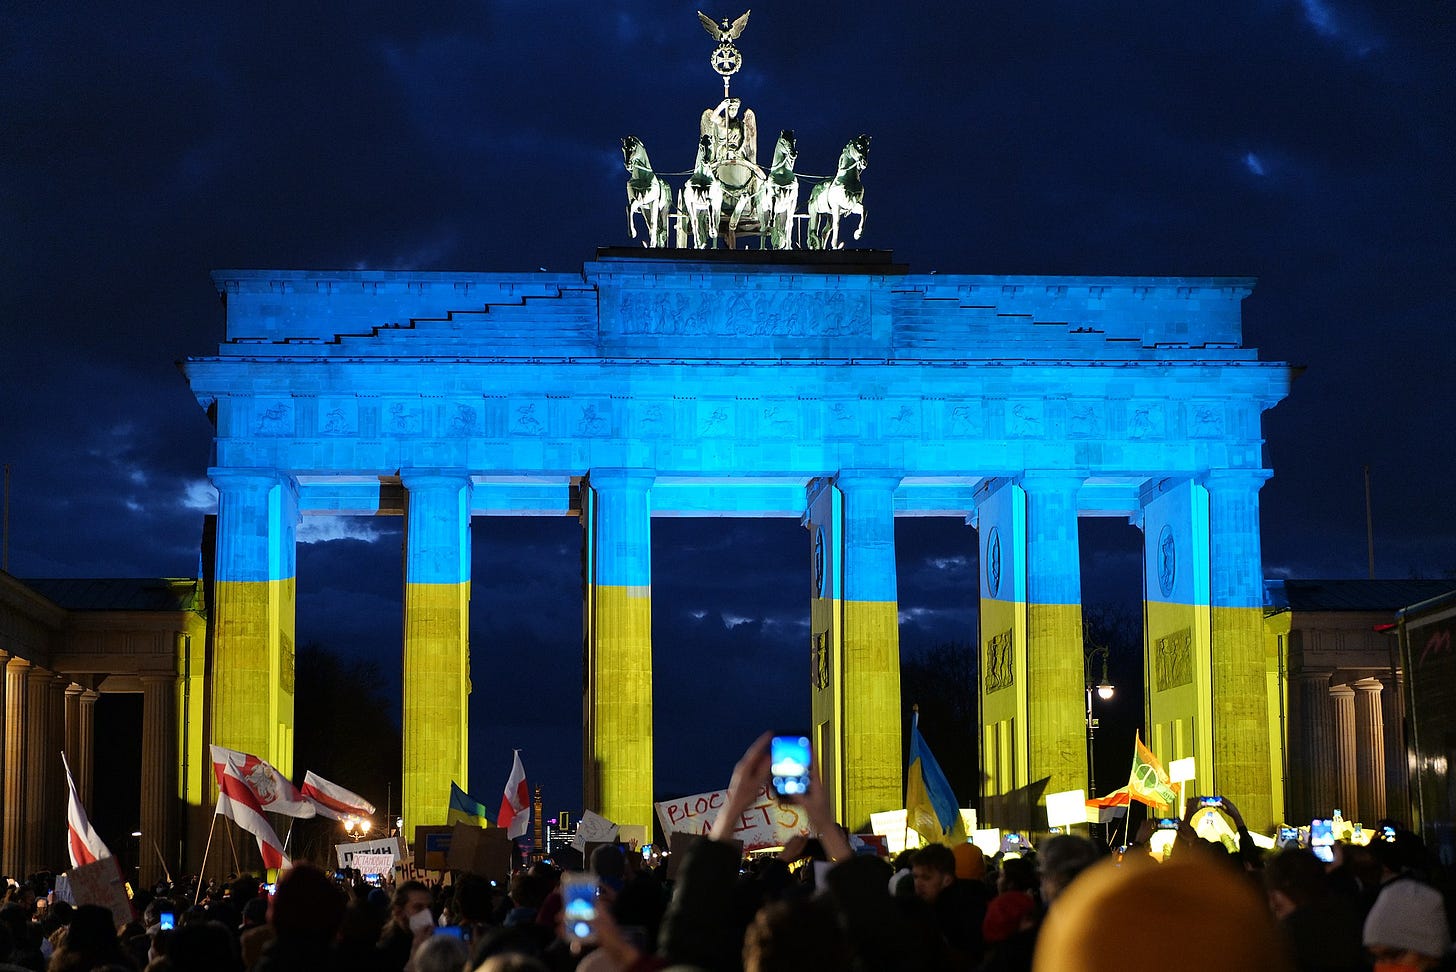 The Brandenburg Gate in Berlin, Germany illuminated with the colours of the Ukrainian flag on February 24, 2022 in solidarity against Russia's invasion of Ukraine. (Image: Leonhard Lenz, CC0, via Wikimedia Commons)